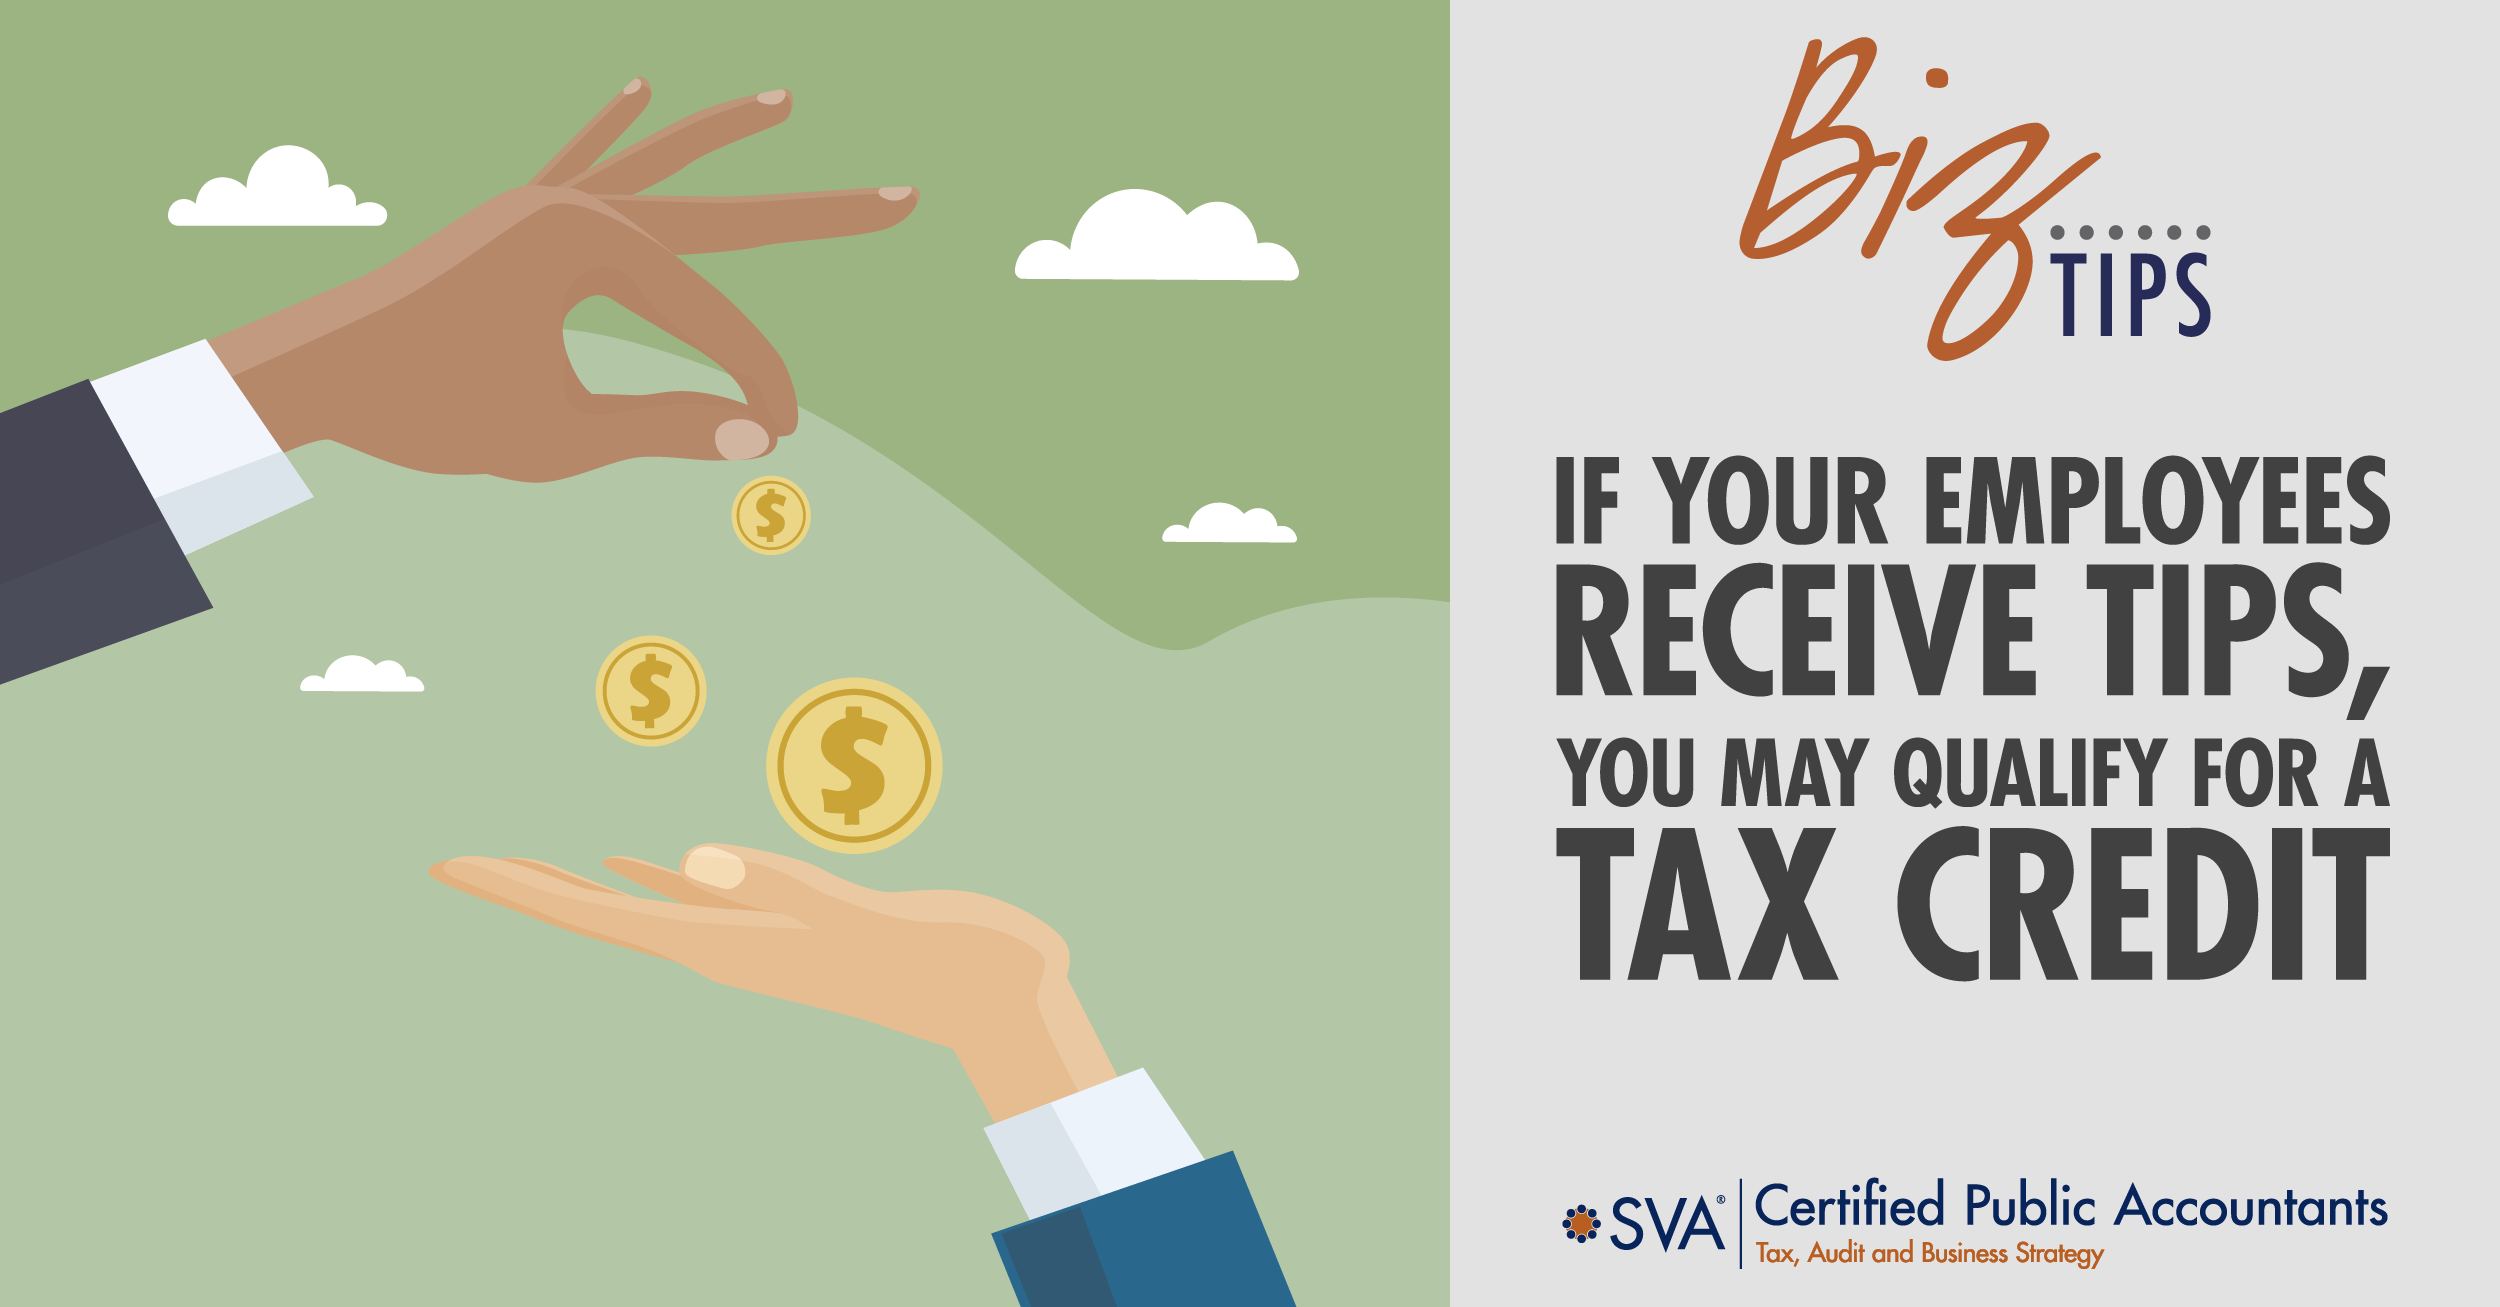 If Your Employees Receive Tips, You May Qualify for a Tax Credit